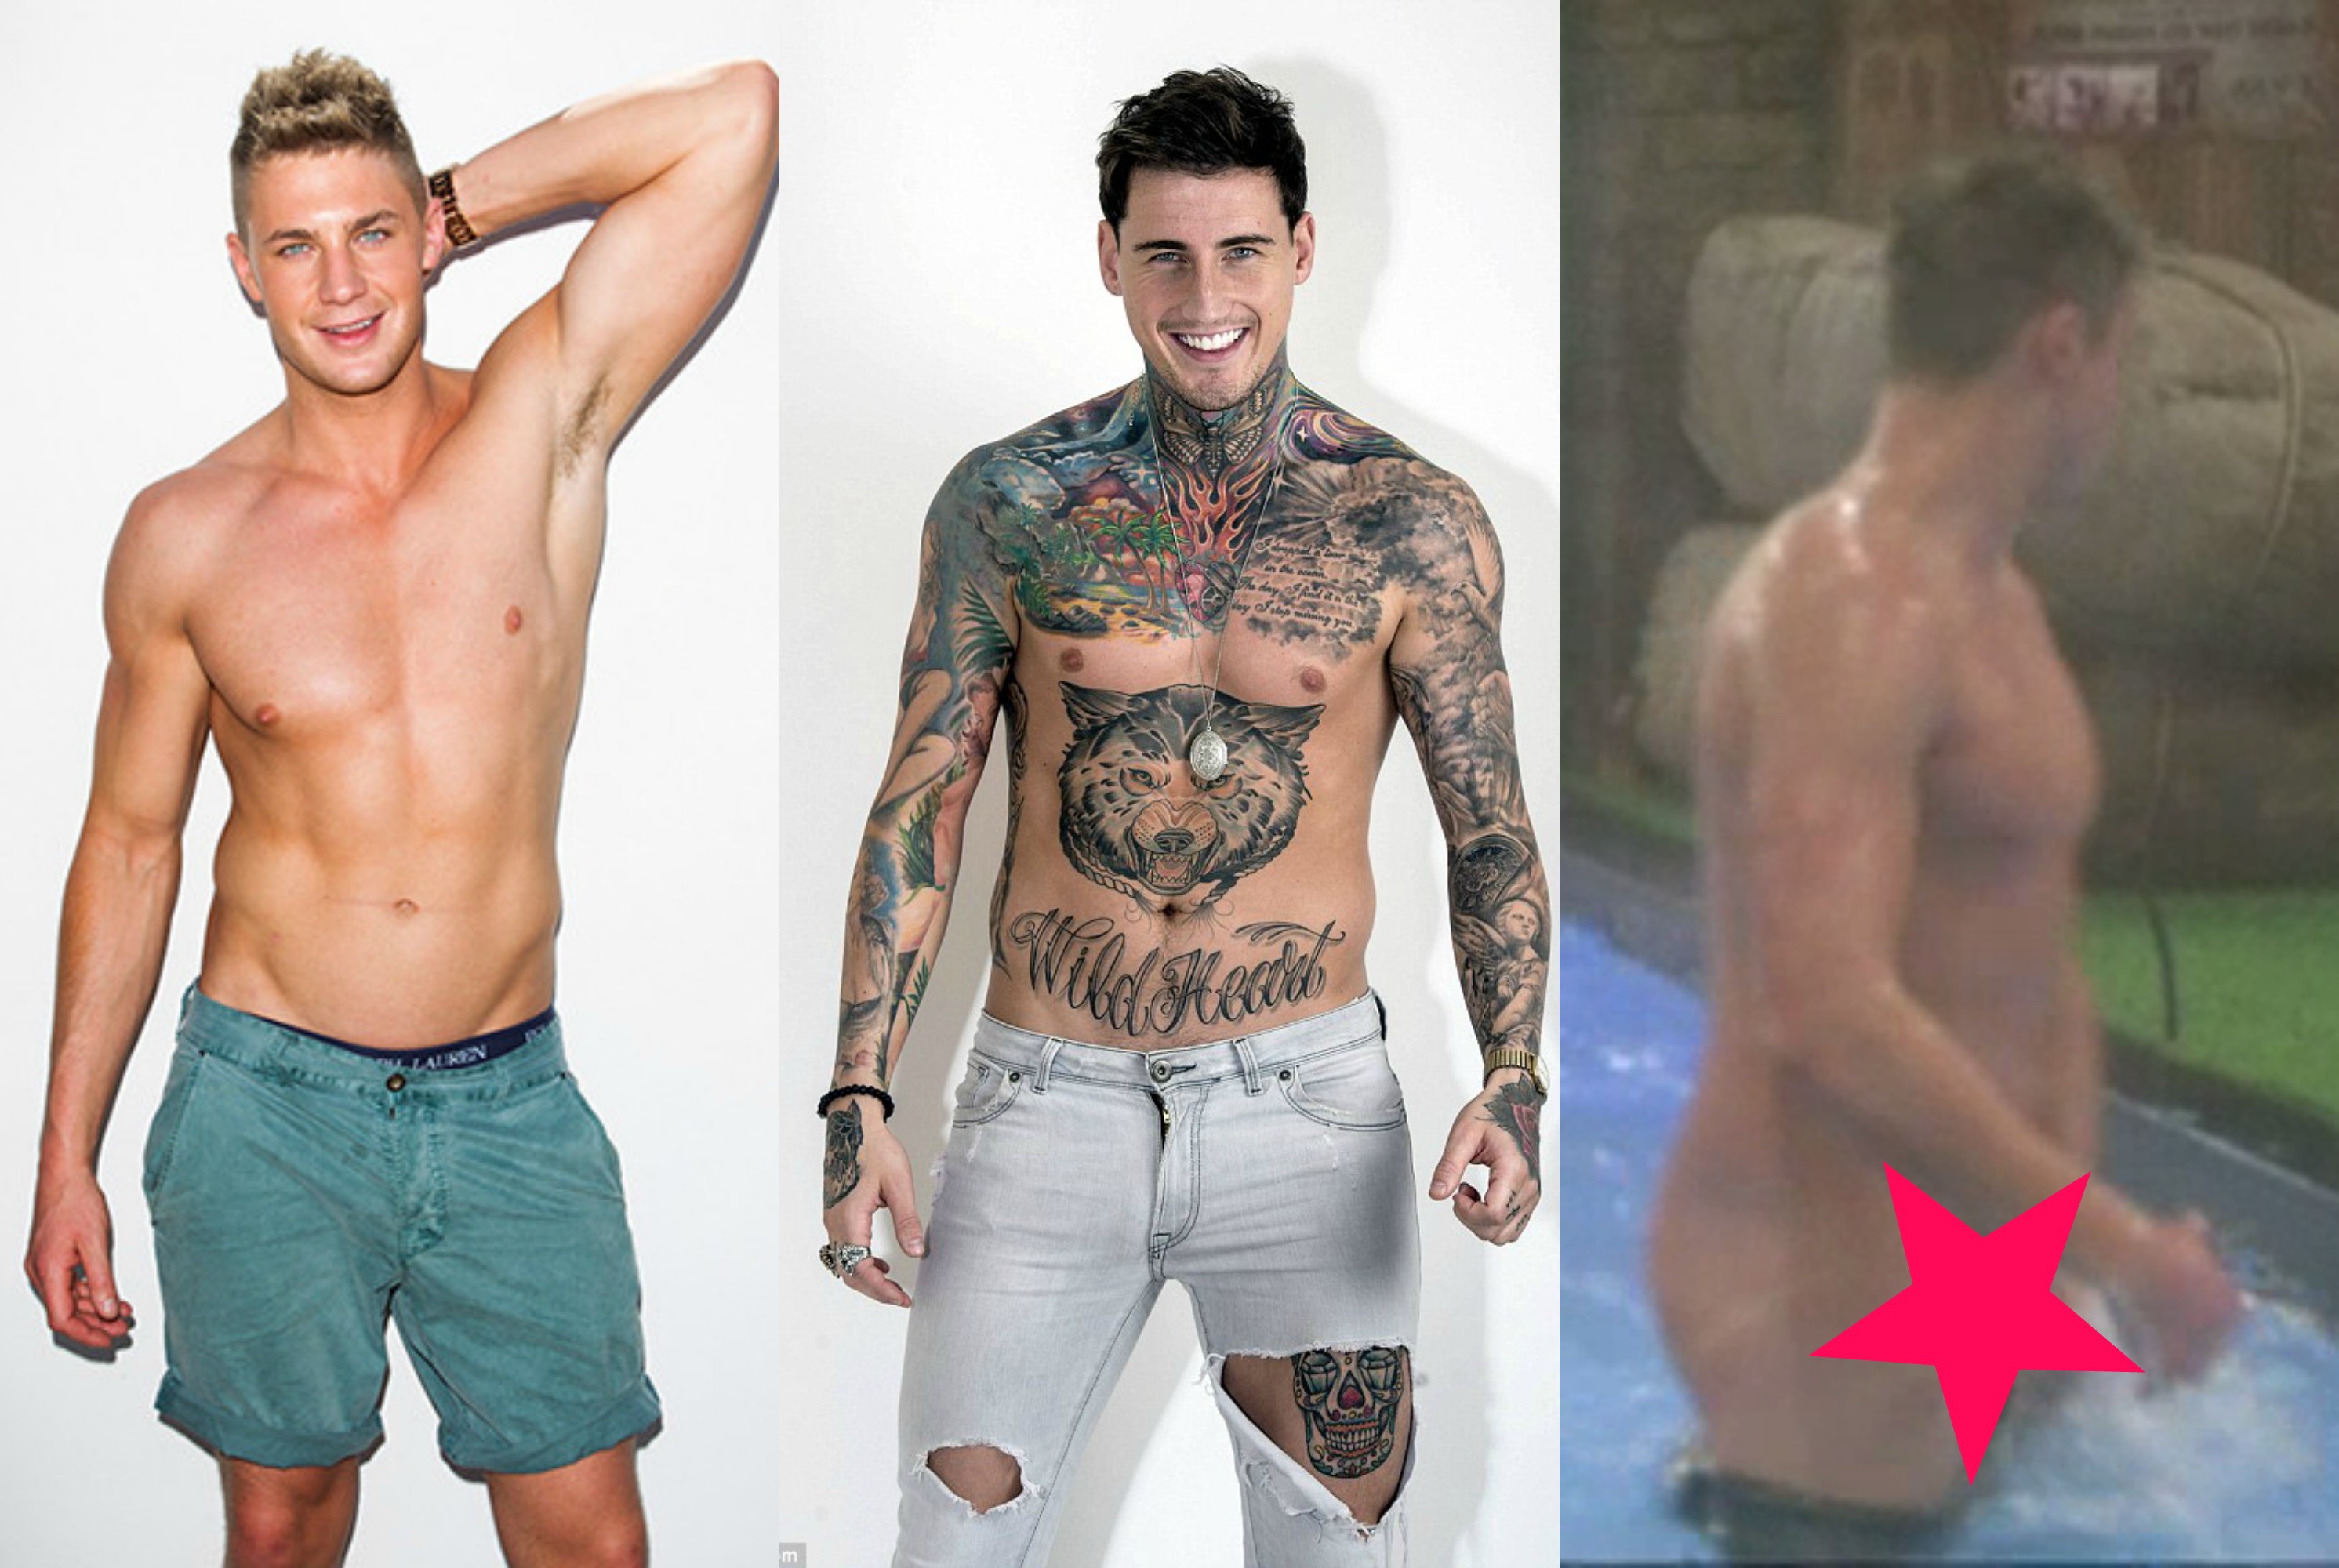 MAN CANDY: Jeremy McConnell And Scotty T Get Drunk And Naked NSFW - Cocktai...